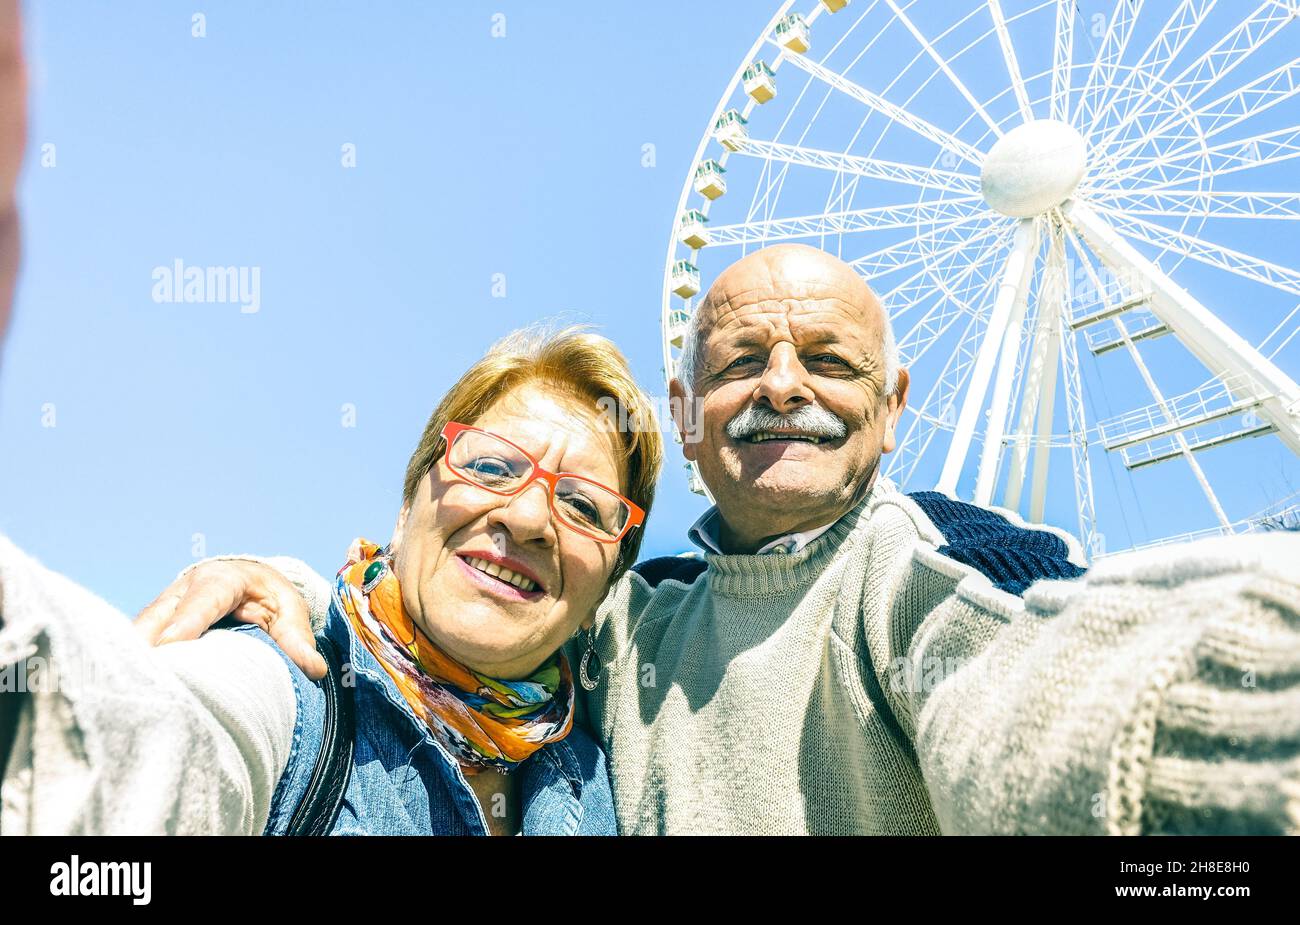 Happy retired senior couple taking selfie at winter travel around world - Active playful elderly concept having fun together - Mature people Stock Photo